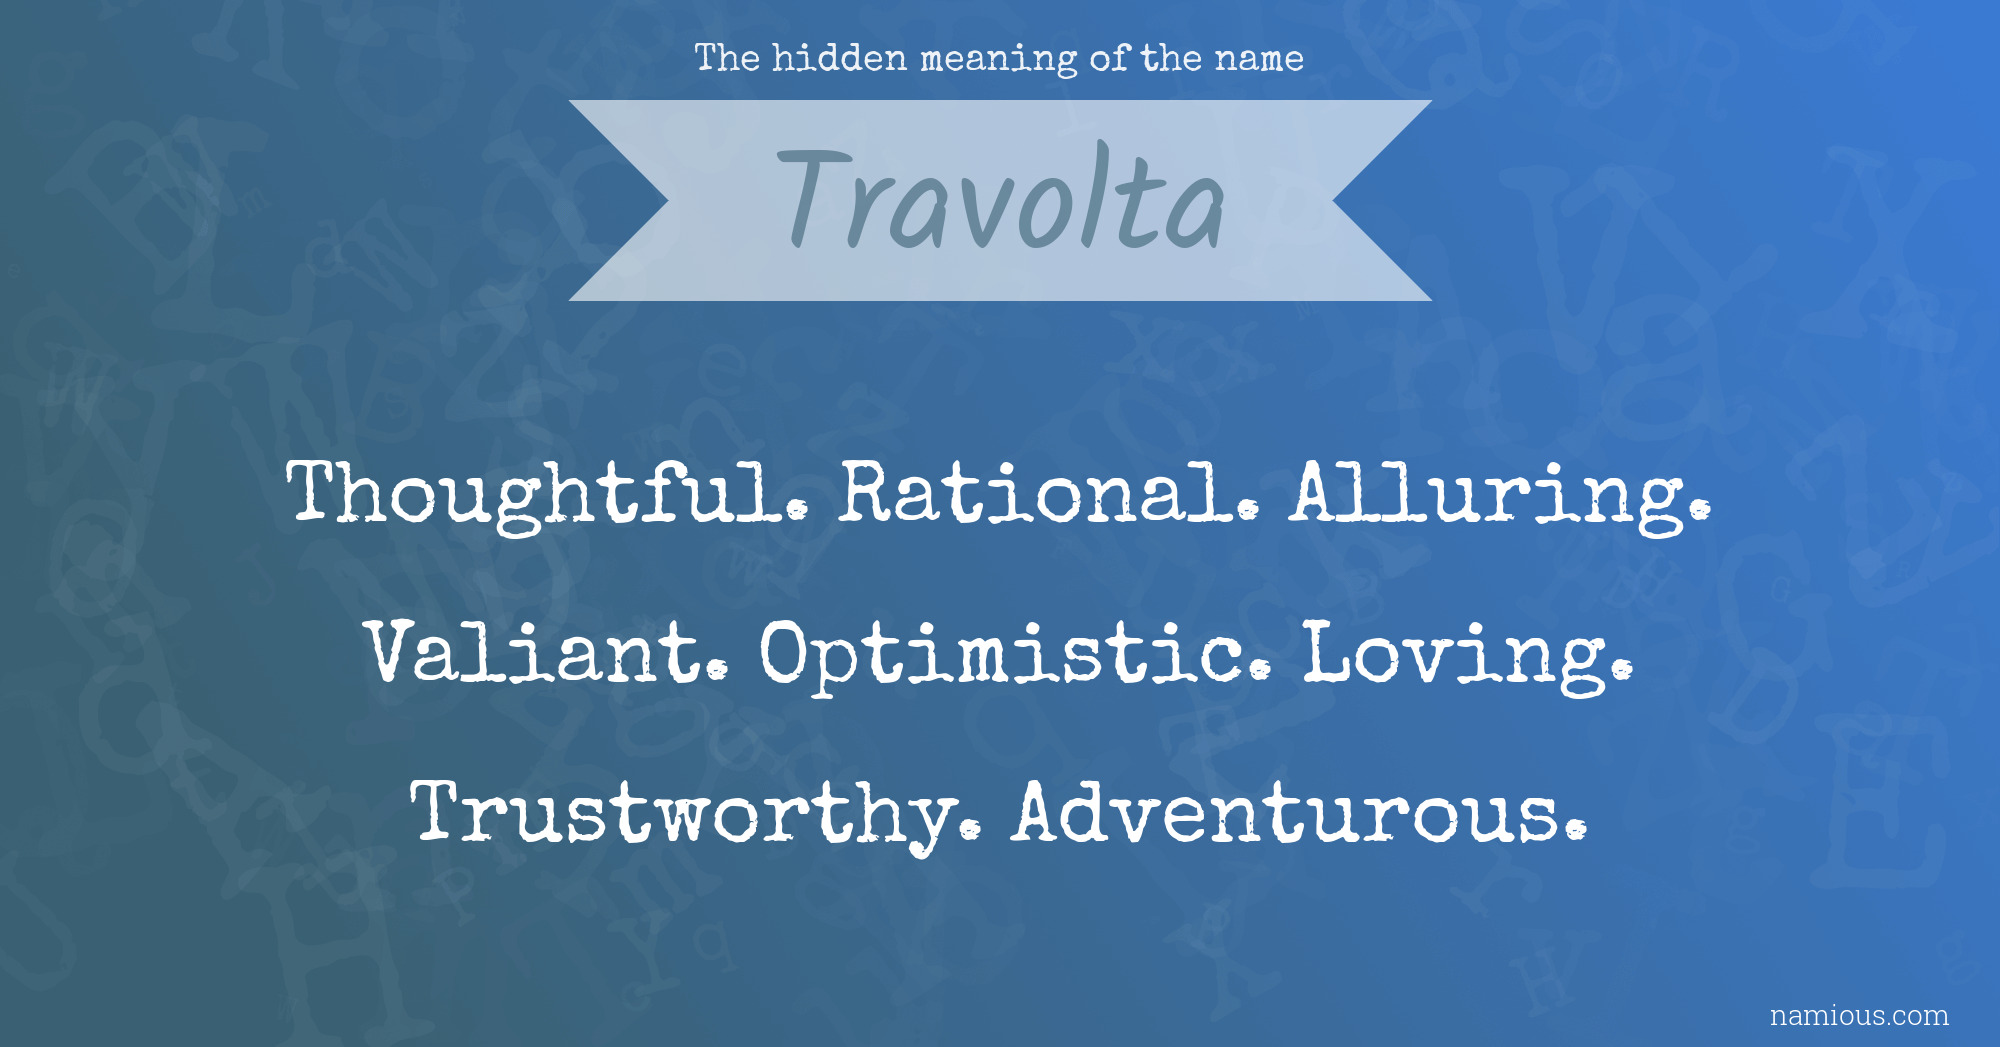 The hidden meaning of the name Travolta